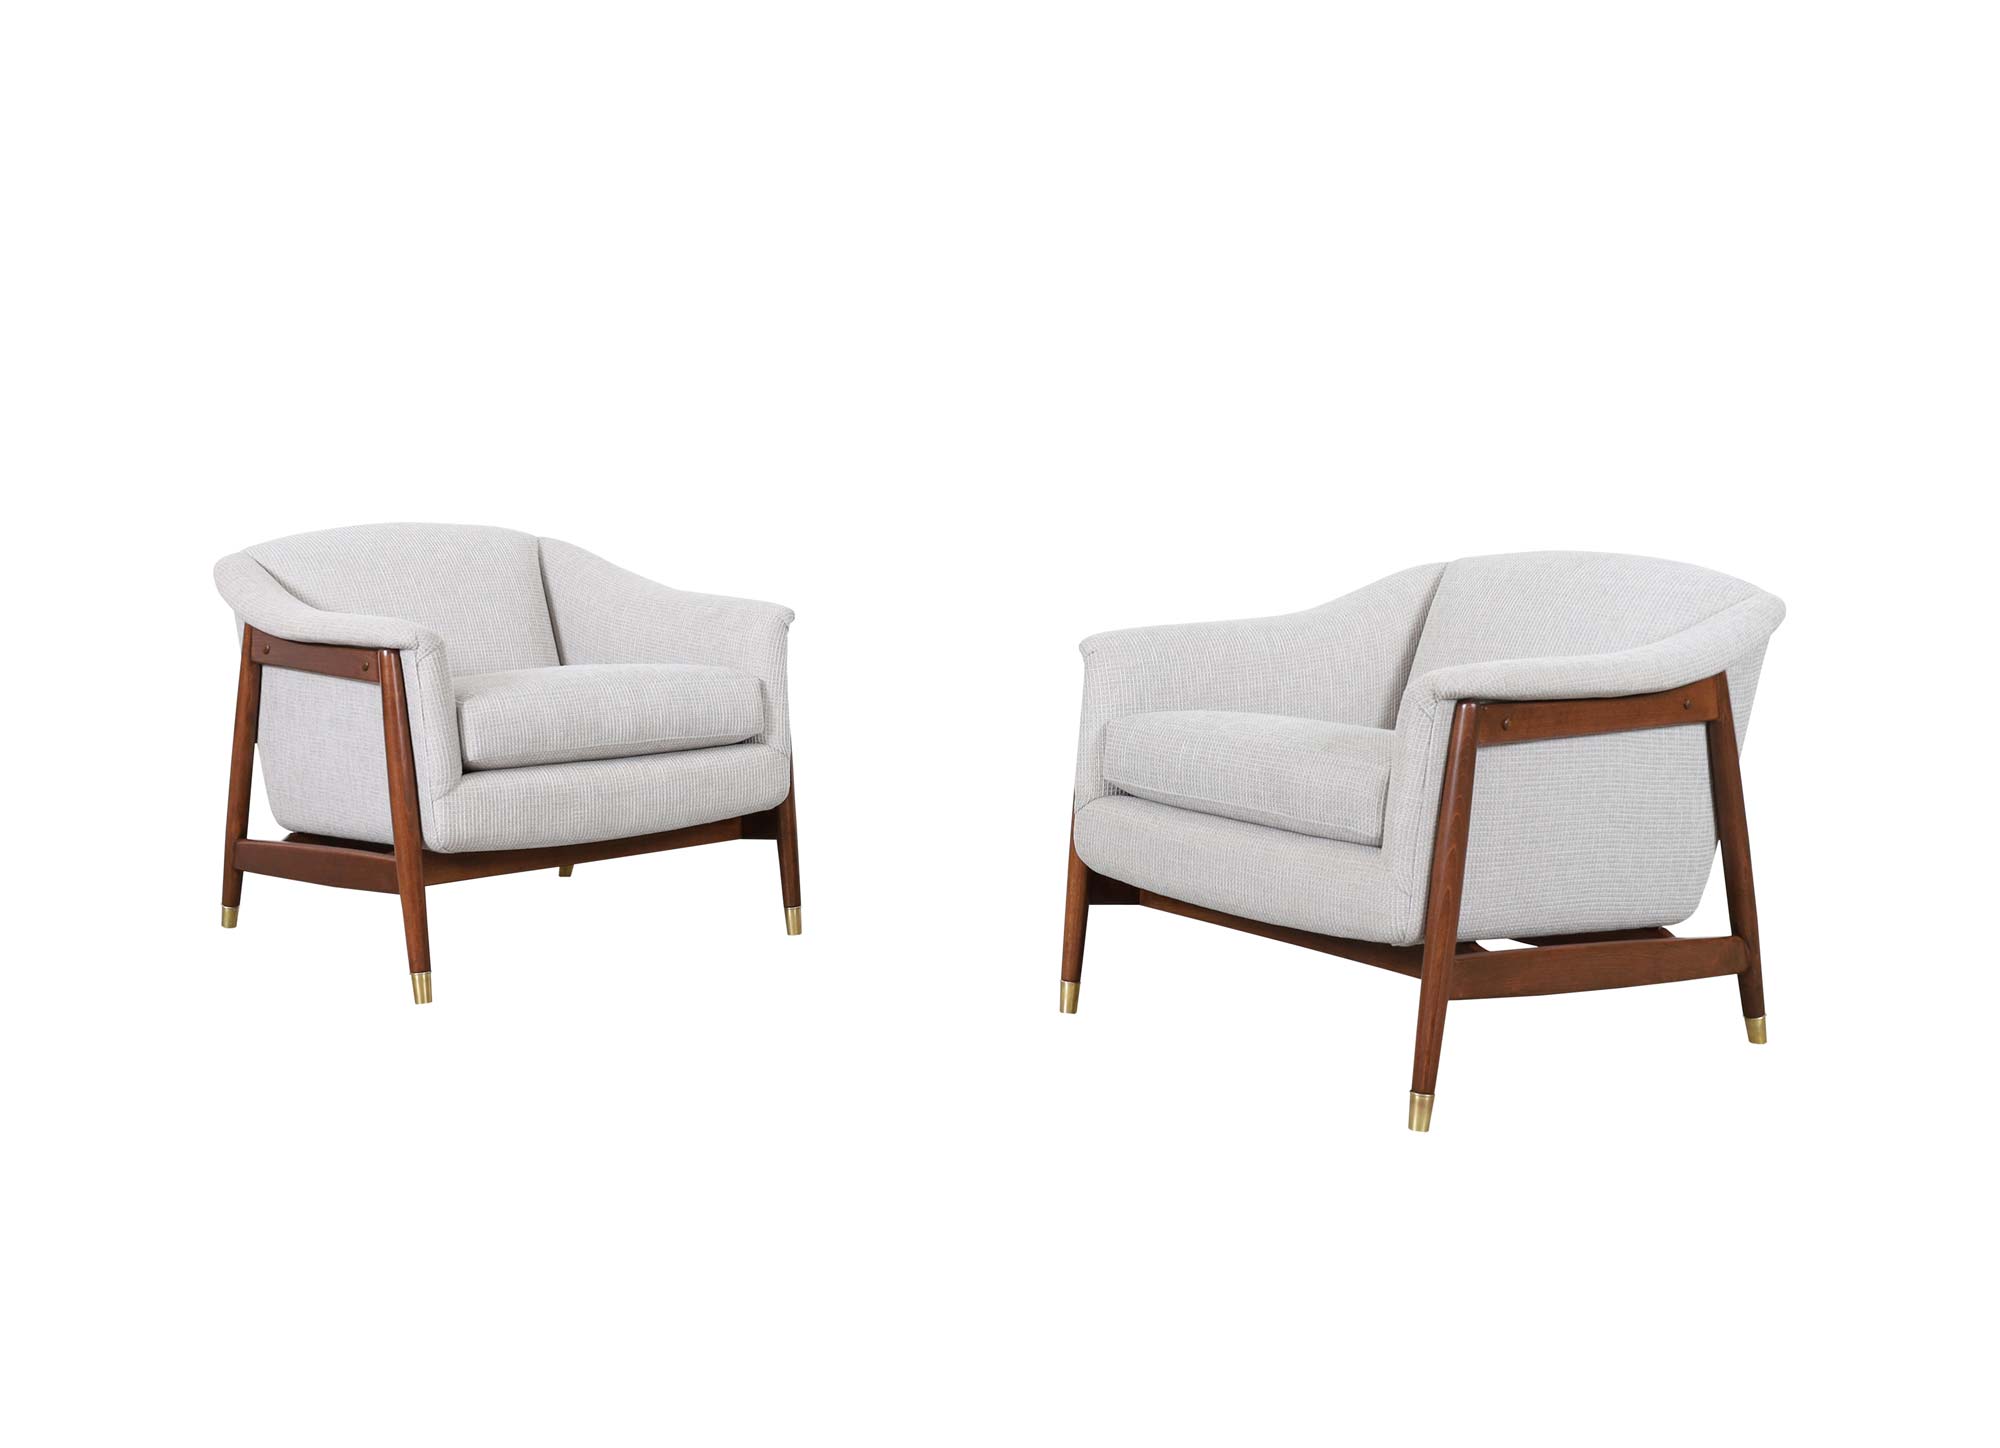 Swedish Walnut Lounge Chairs by Folke Ohlsson for Dux